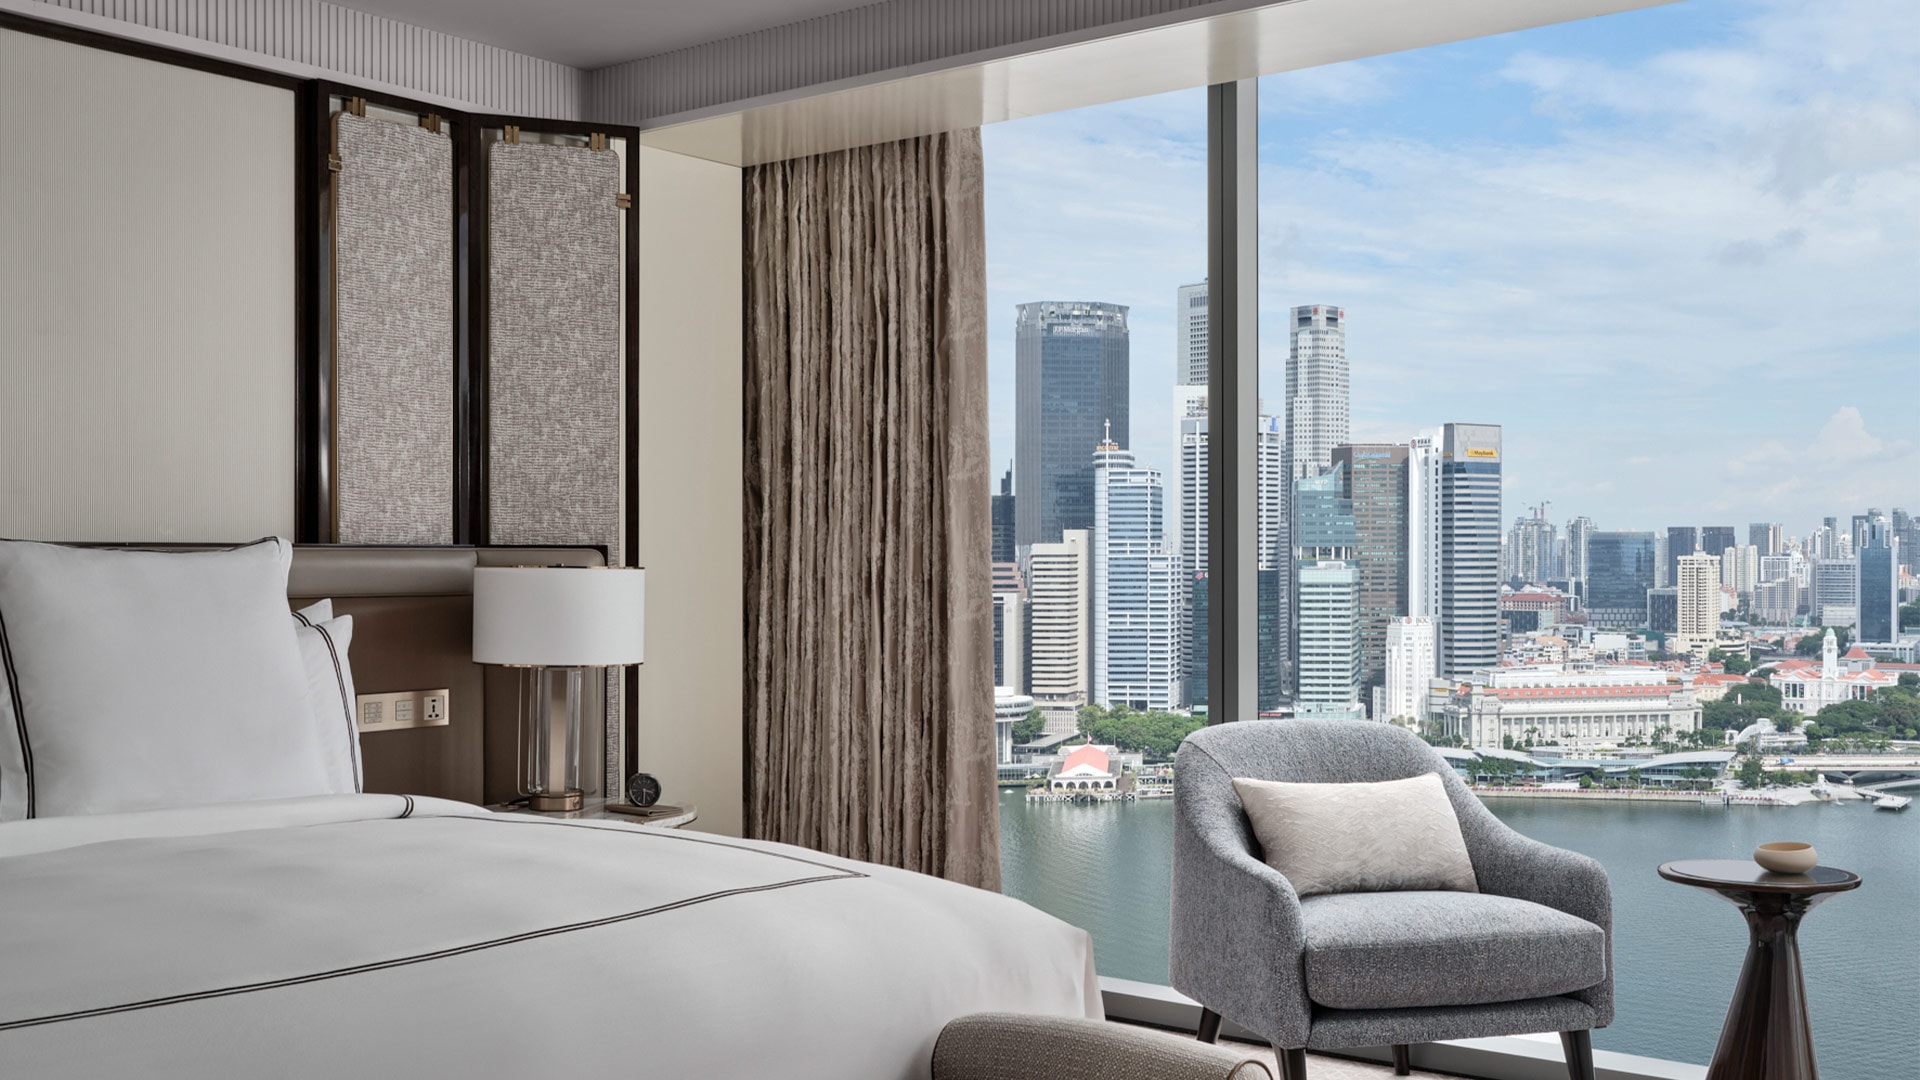 Sands Premier Suite, a hotel room you can stay at Marina Bay Sands, Singapore